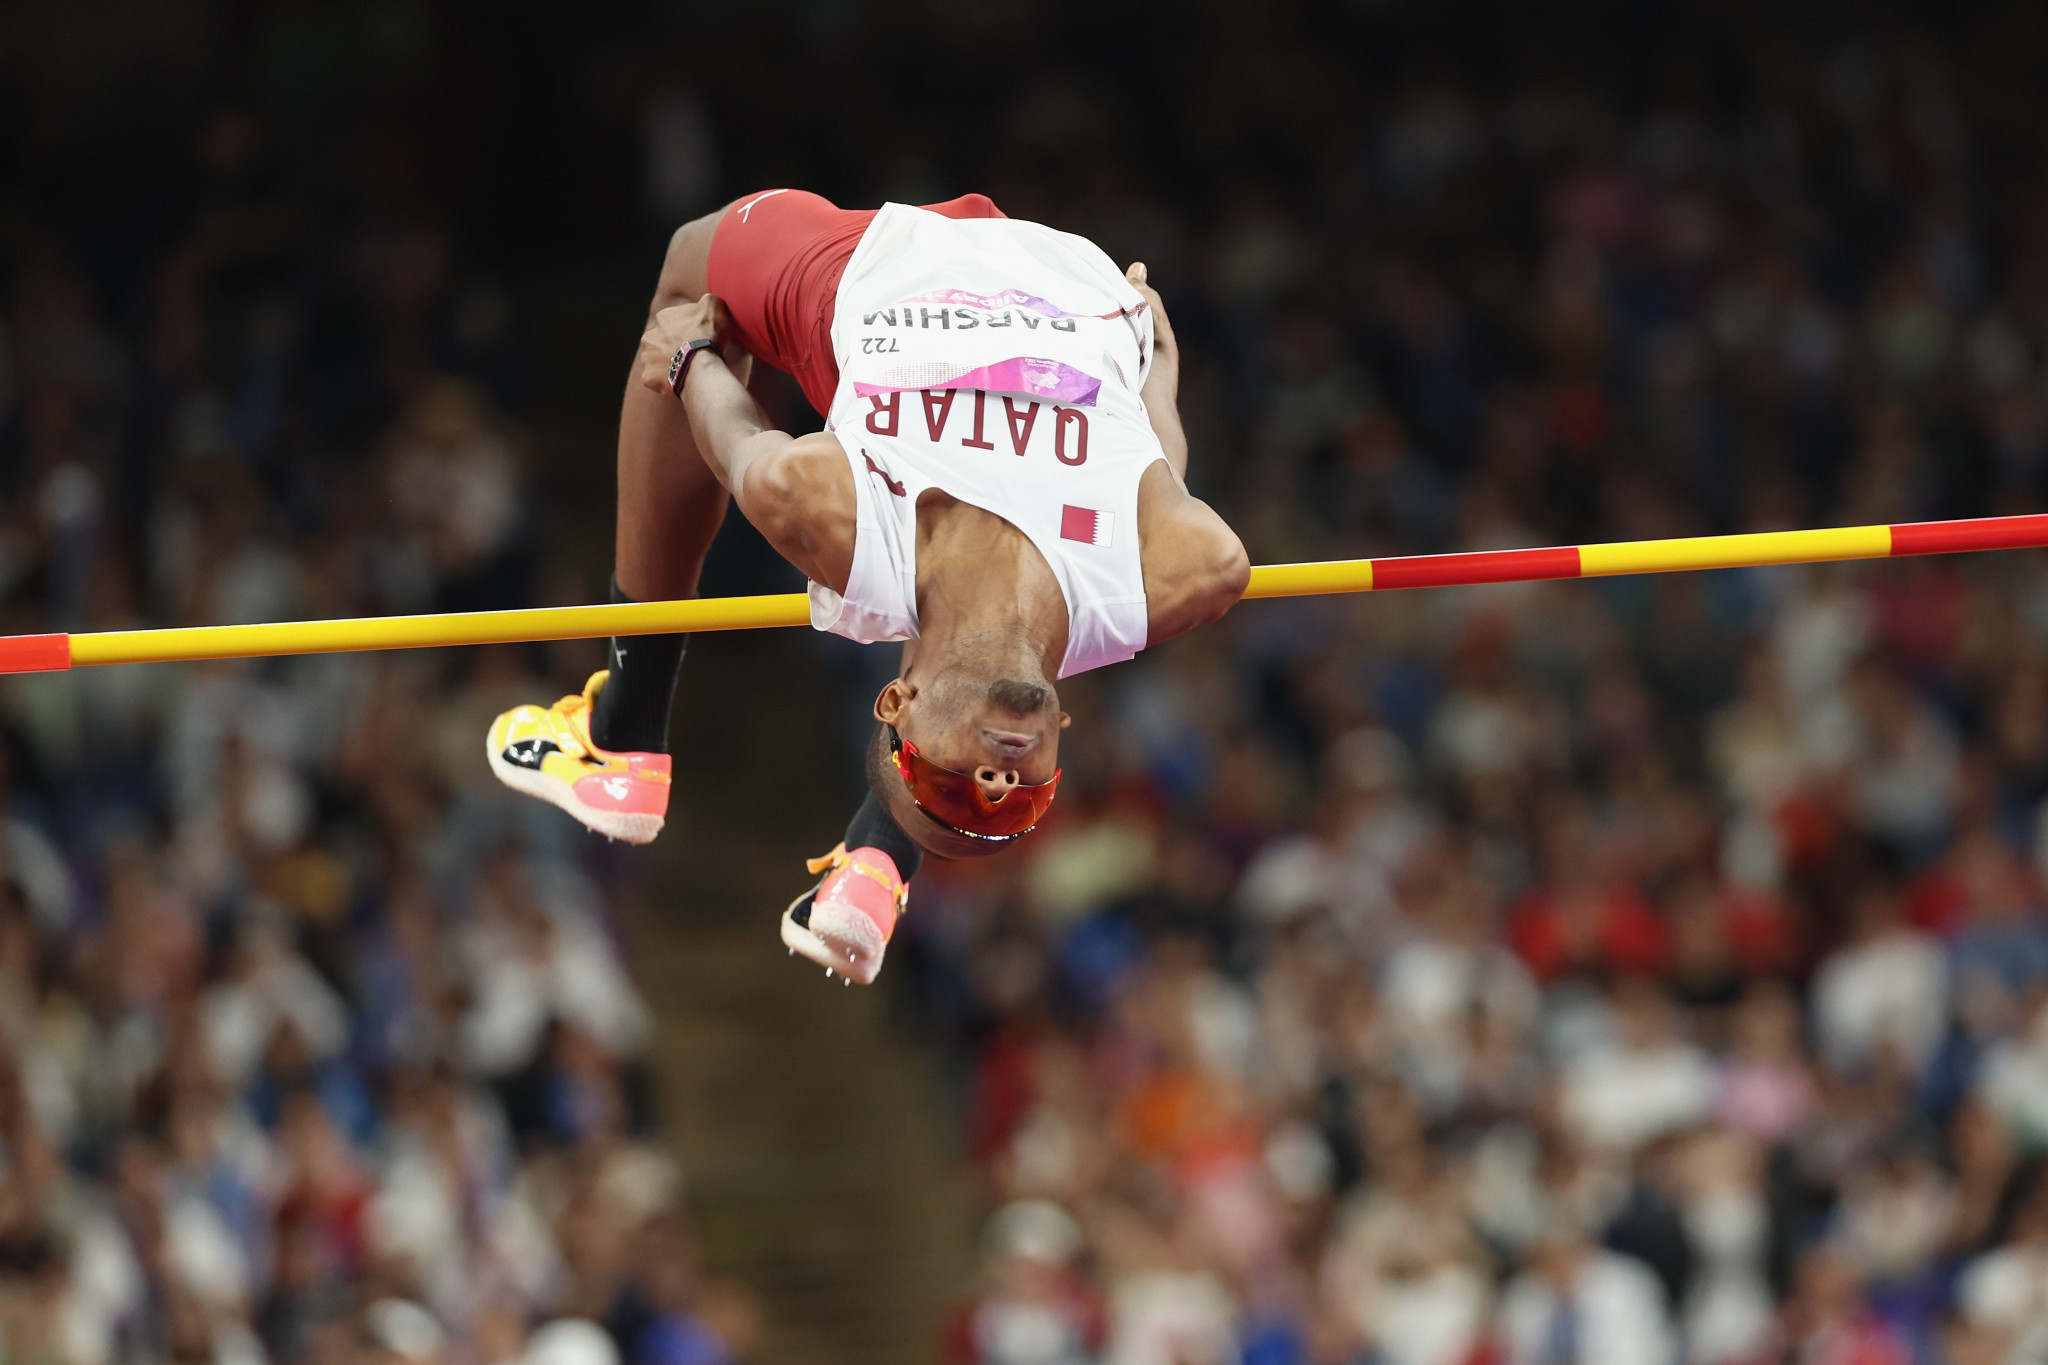 Qatari Mutaz Barshim broke the Asian Games men's high jump record to win the gold medal ©Getty Images